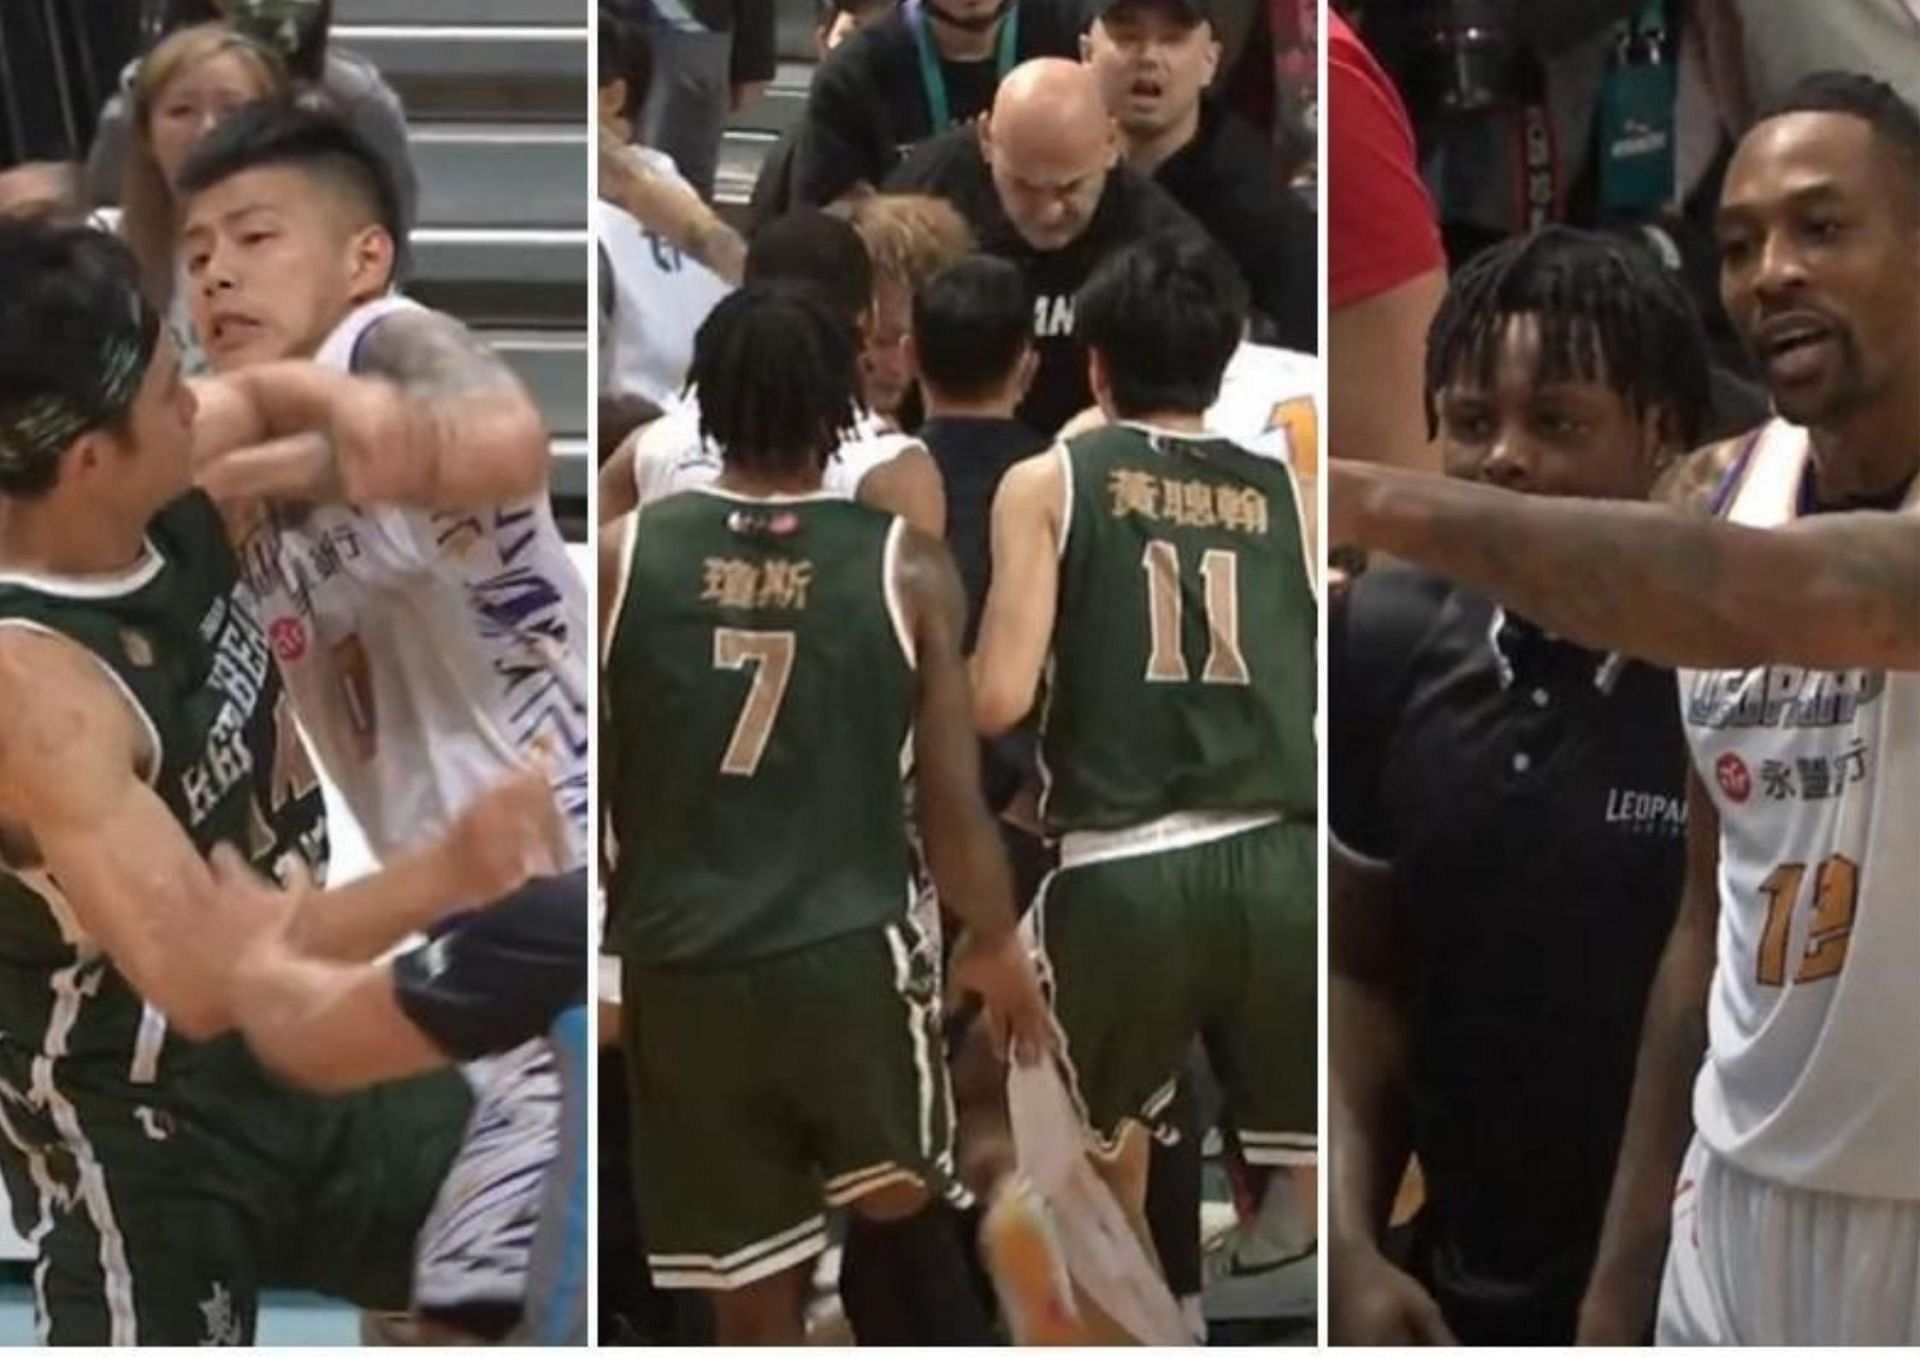 Dwight Howard was ejected along wtih 11 other players after a massive brawl during a game in Taiwan. [photo: Taiwan News]